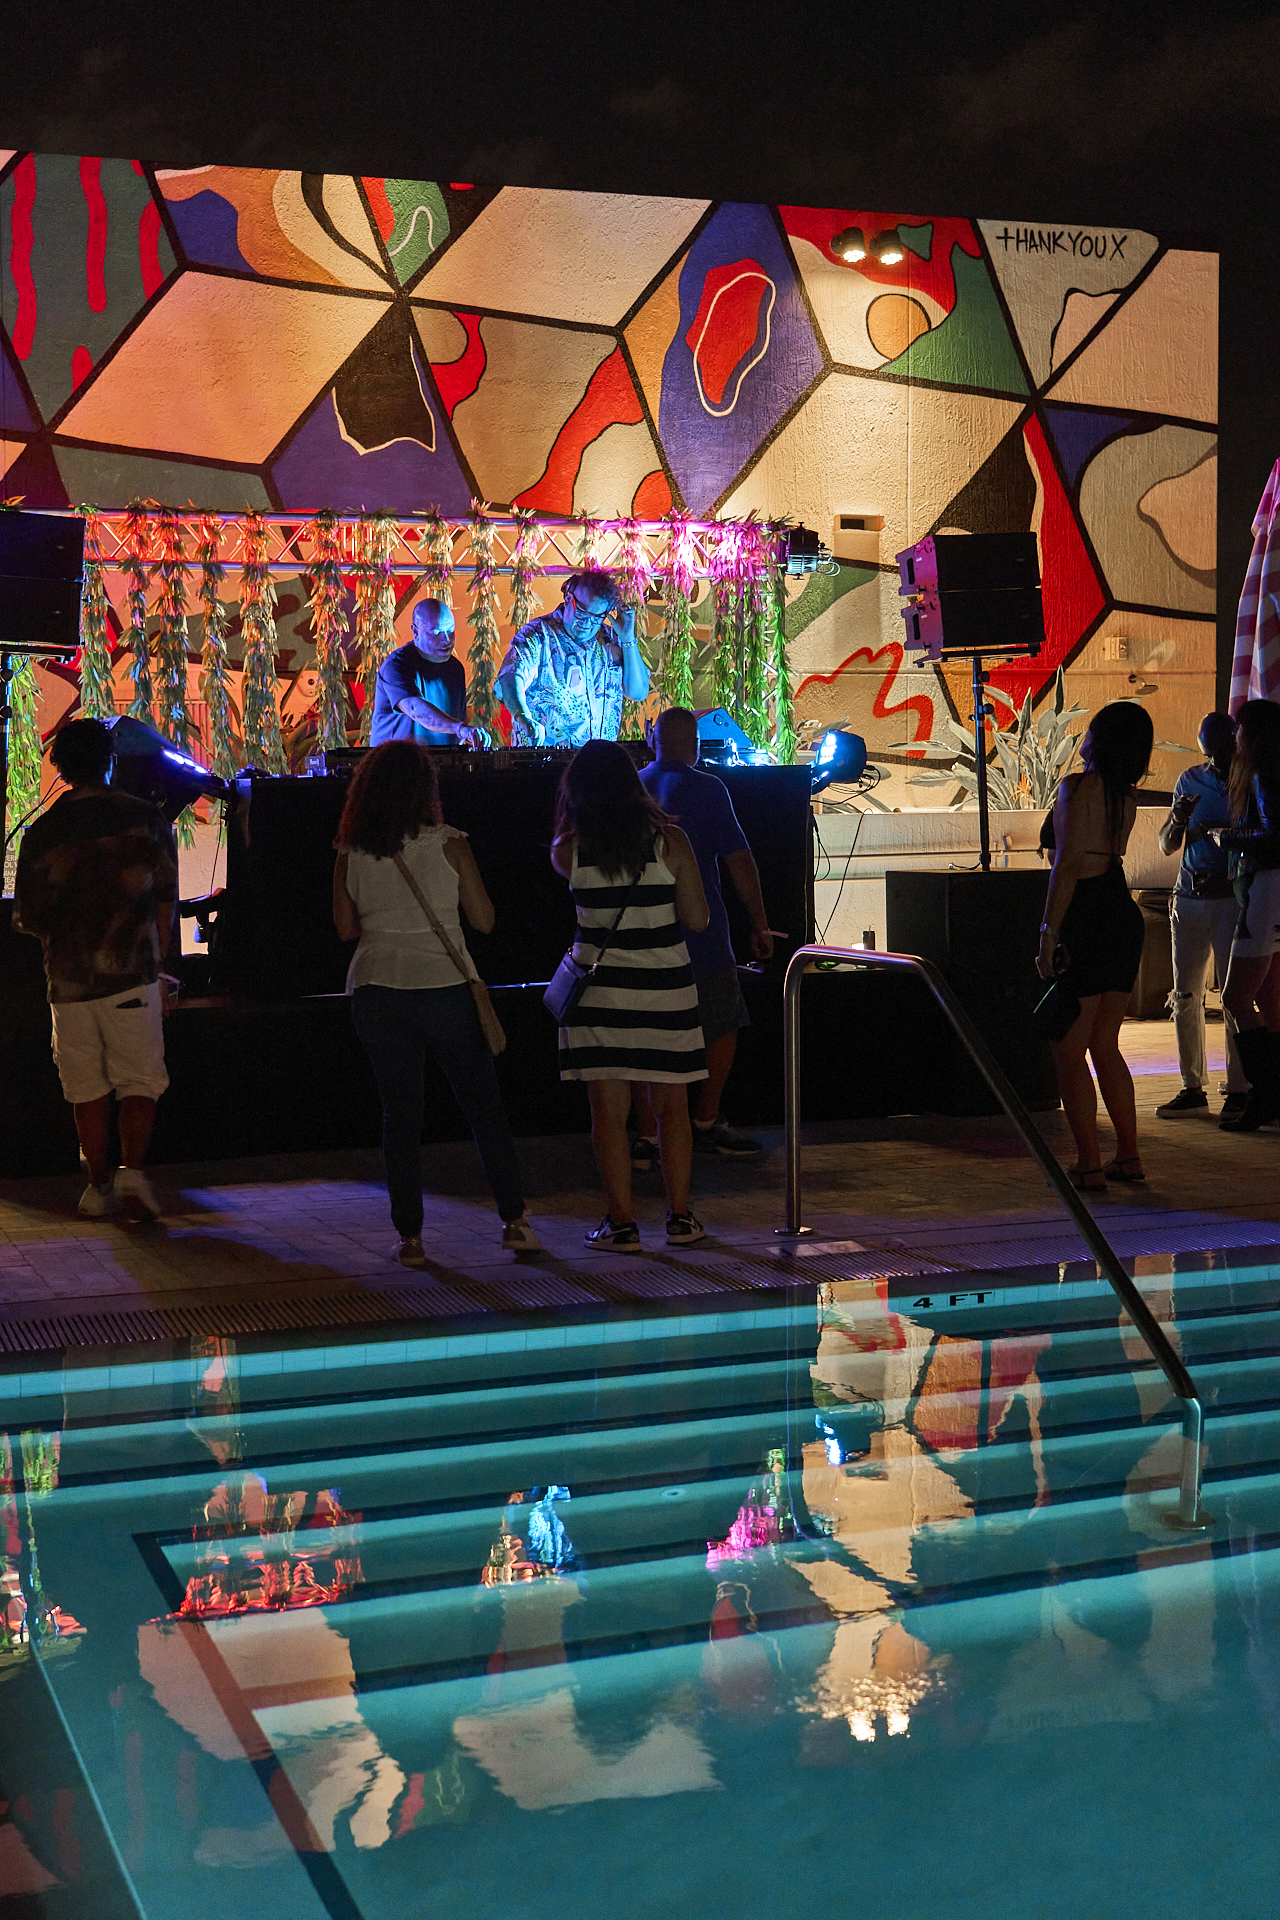 People gather near a pool under colorful lighting, facing a DJ booth with two DJs playing music. A vibrant mural is on the wall behind the DJs.